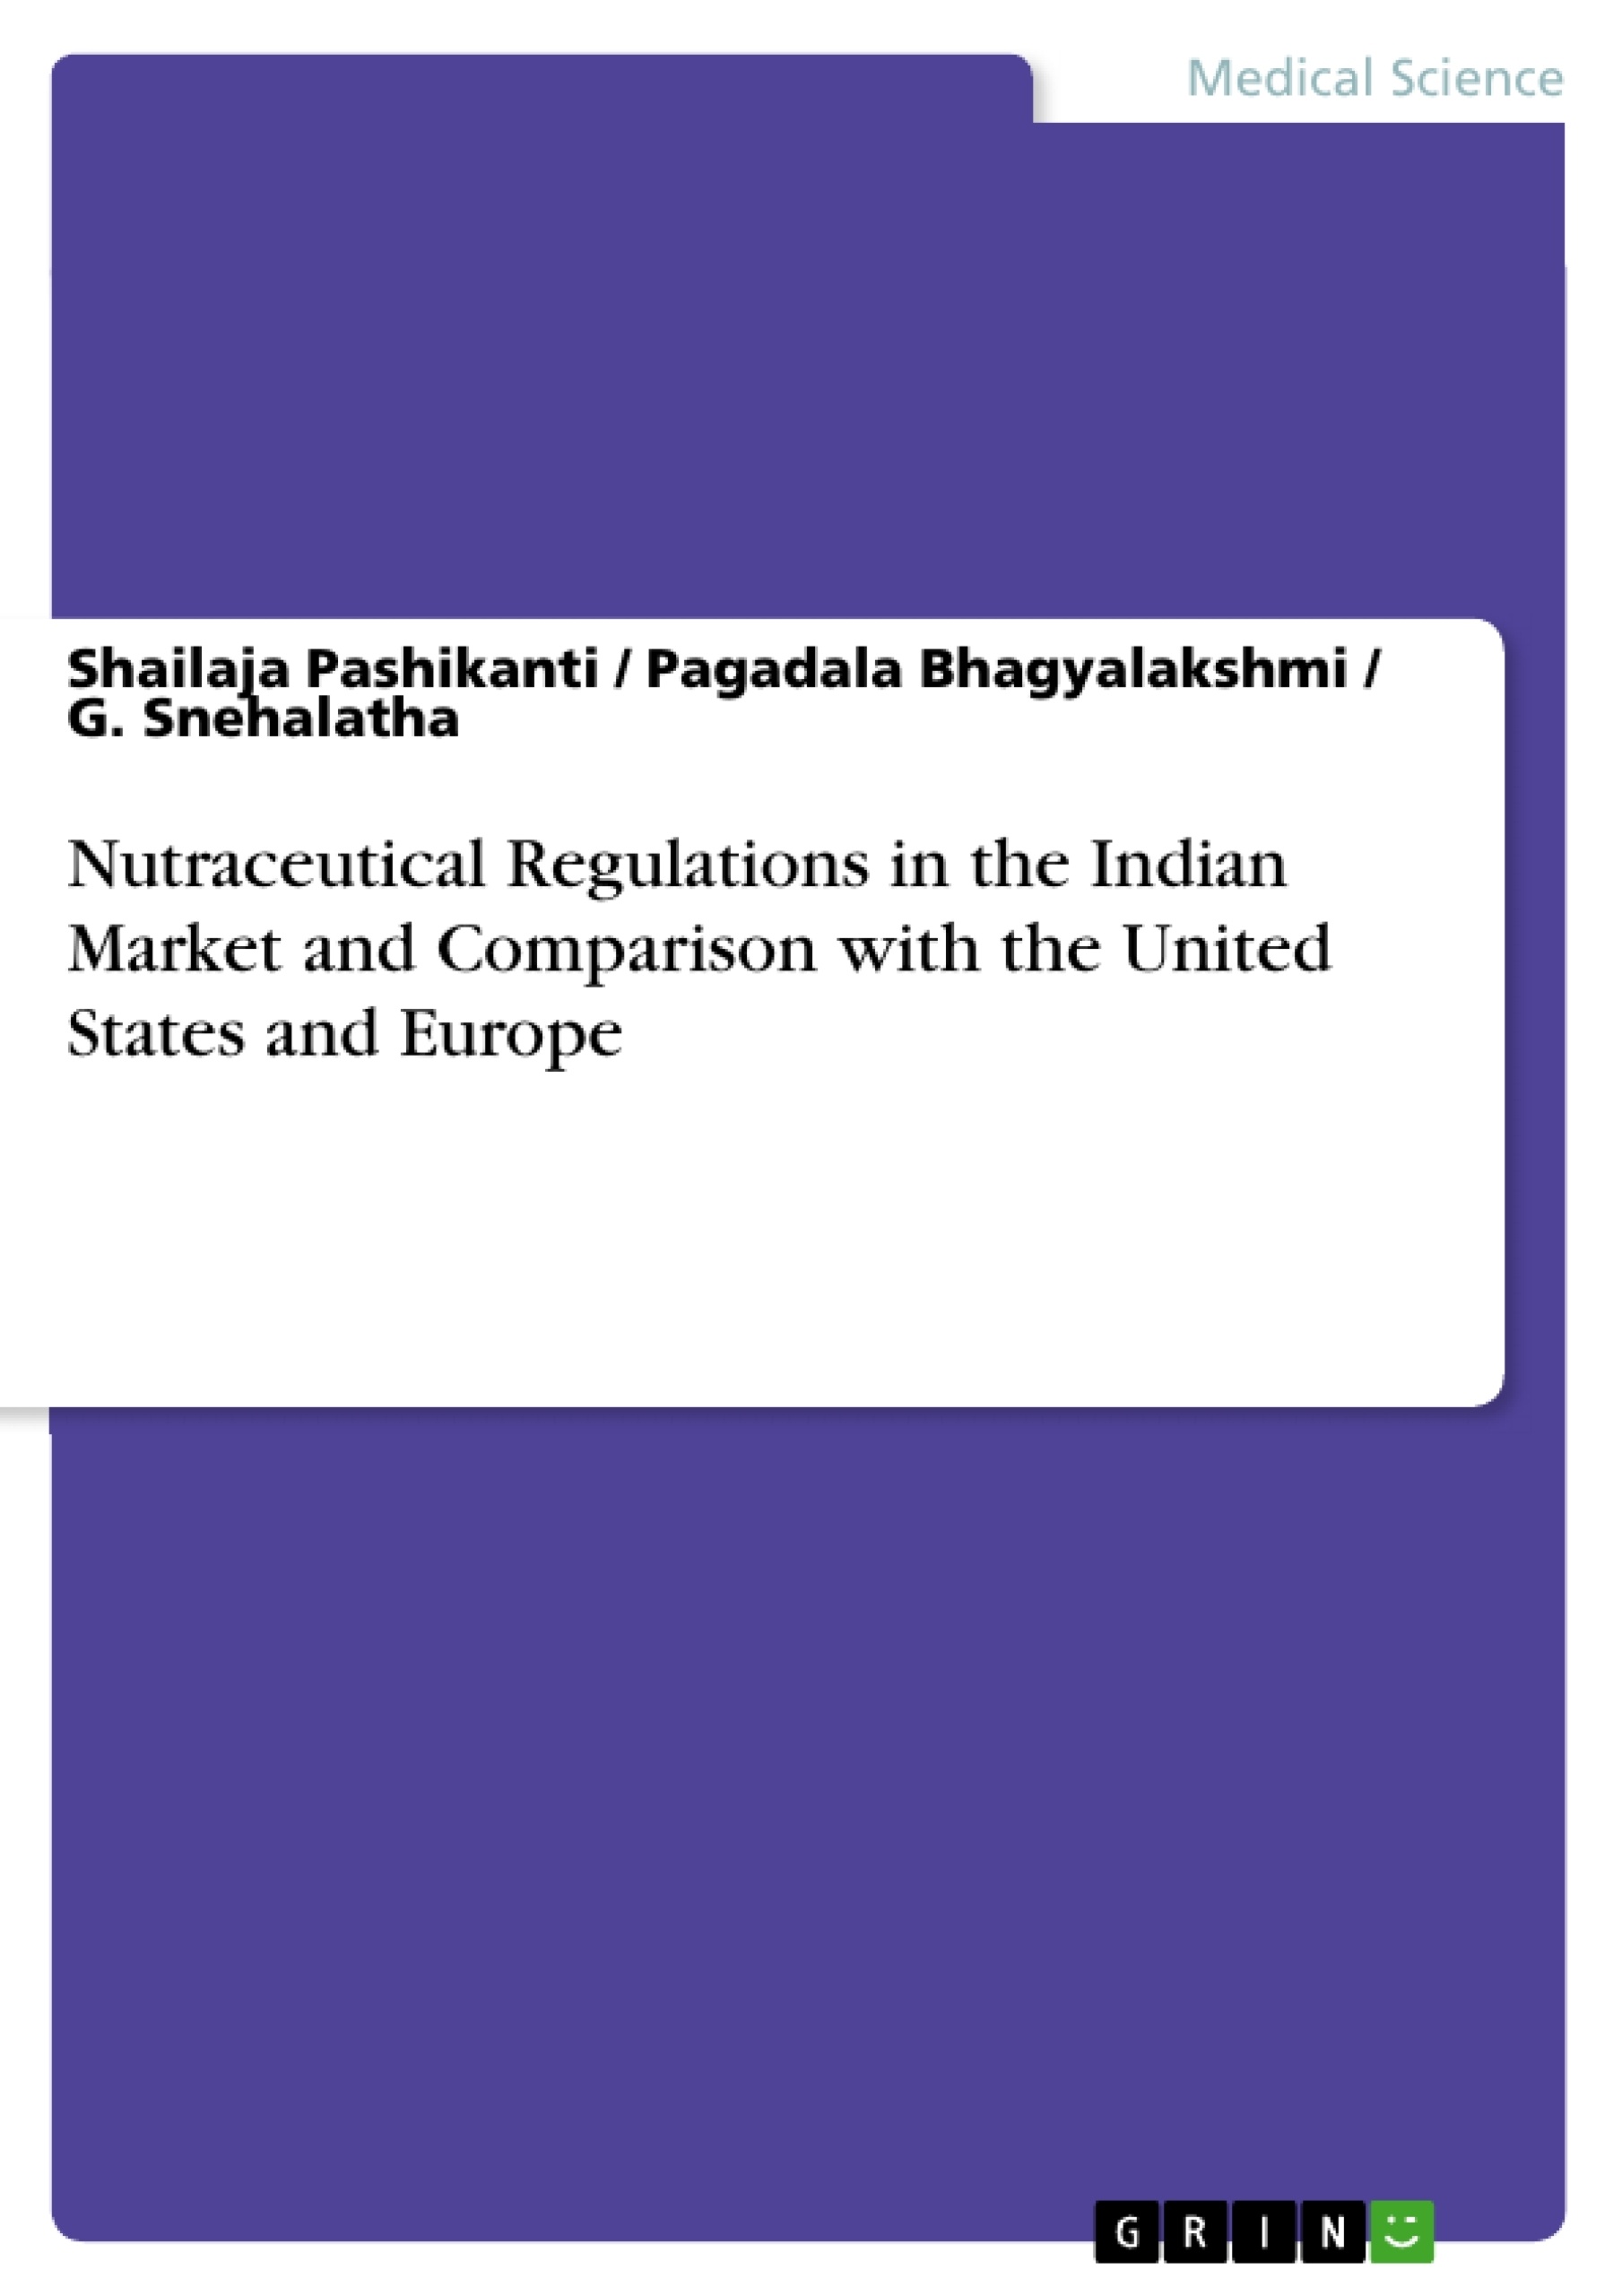 Title: Nutraceutical Regulations in the Indian Market and Comparison with the United States and Europe